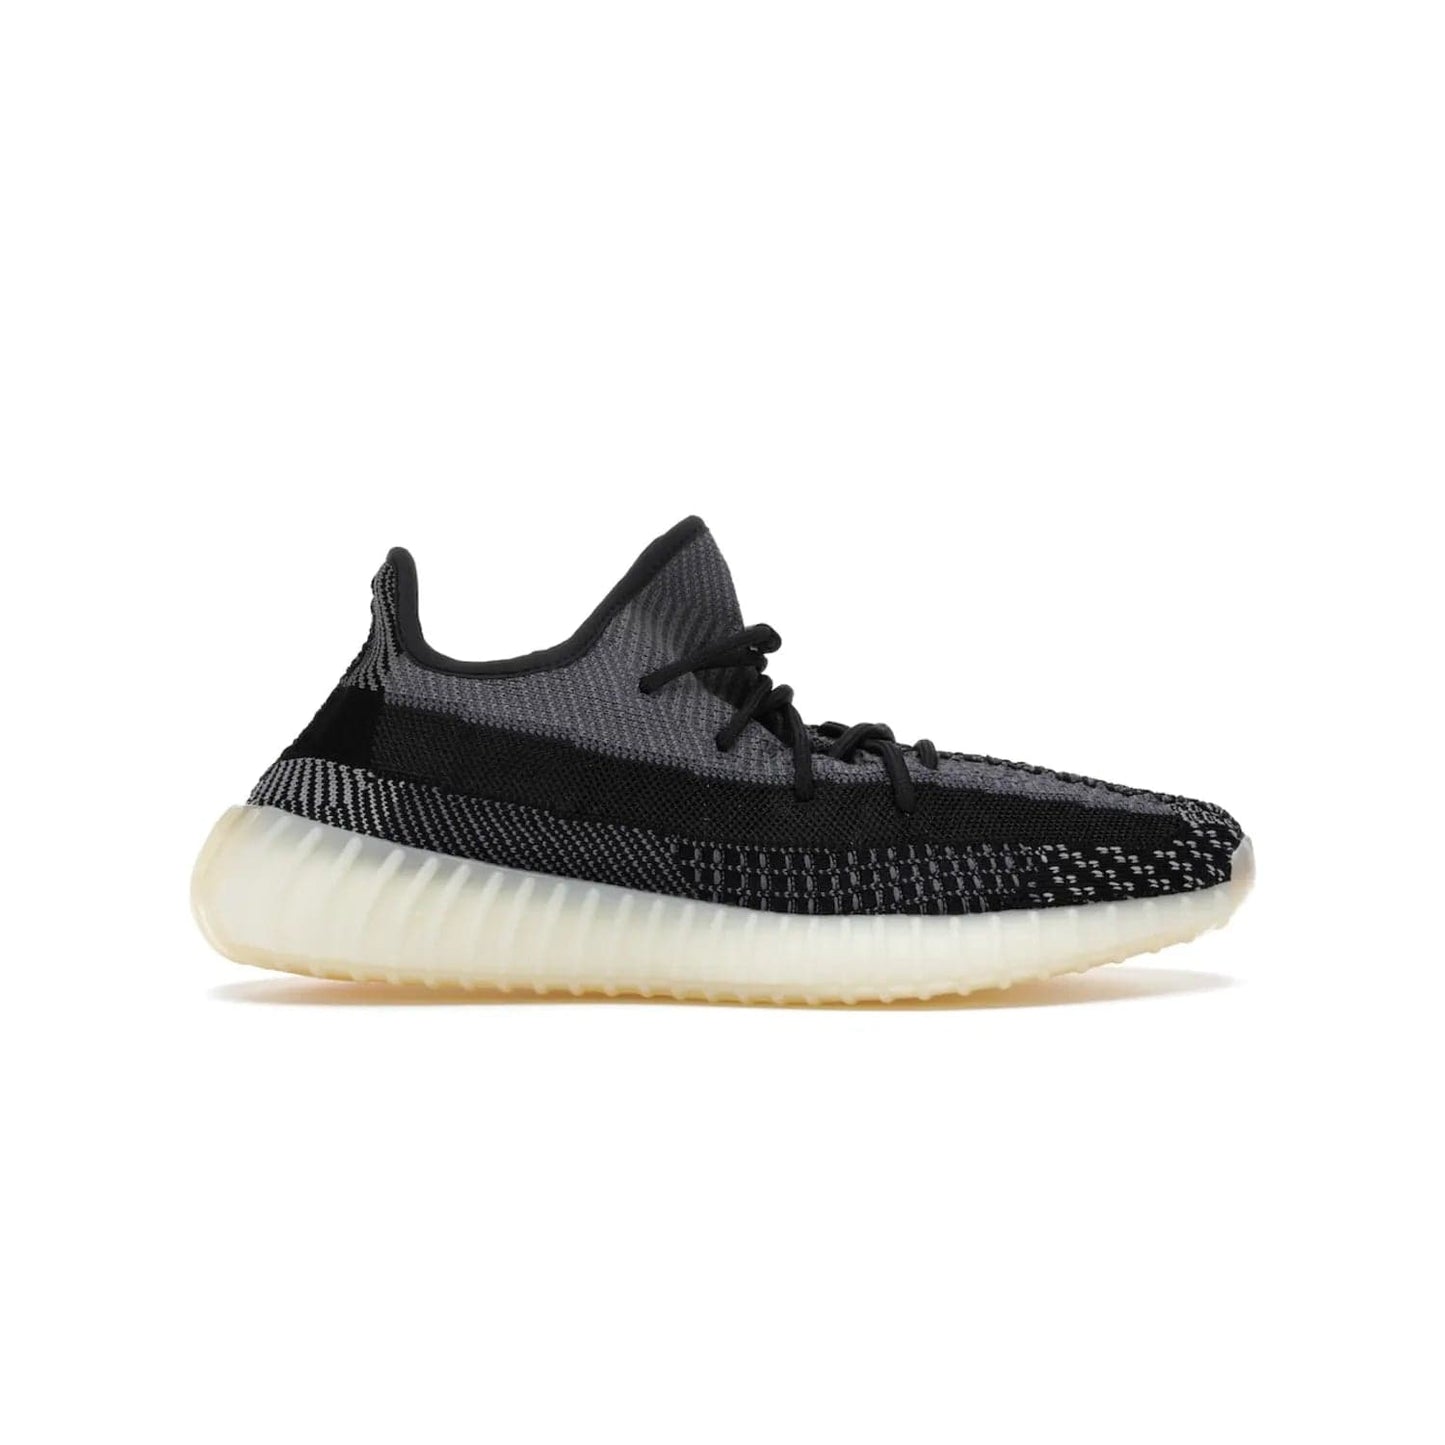 adidas Yeezy Boost 350 V2 Carbon - Image 1 - Only at www.BallersClubKickz.com - Introducing the adidas Yeezy Boost 350 V2 Carbon. Iconic sneaker with a dark-hued upper, breathable Primeknit mesh, signature side stripe, off-white midsole & BOOST cushioning. Perfect for any sneaker lover. Released October 2020.